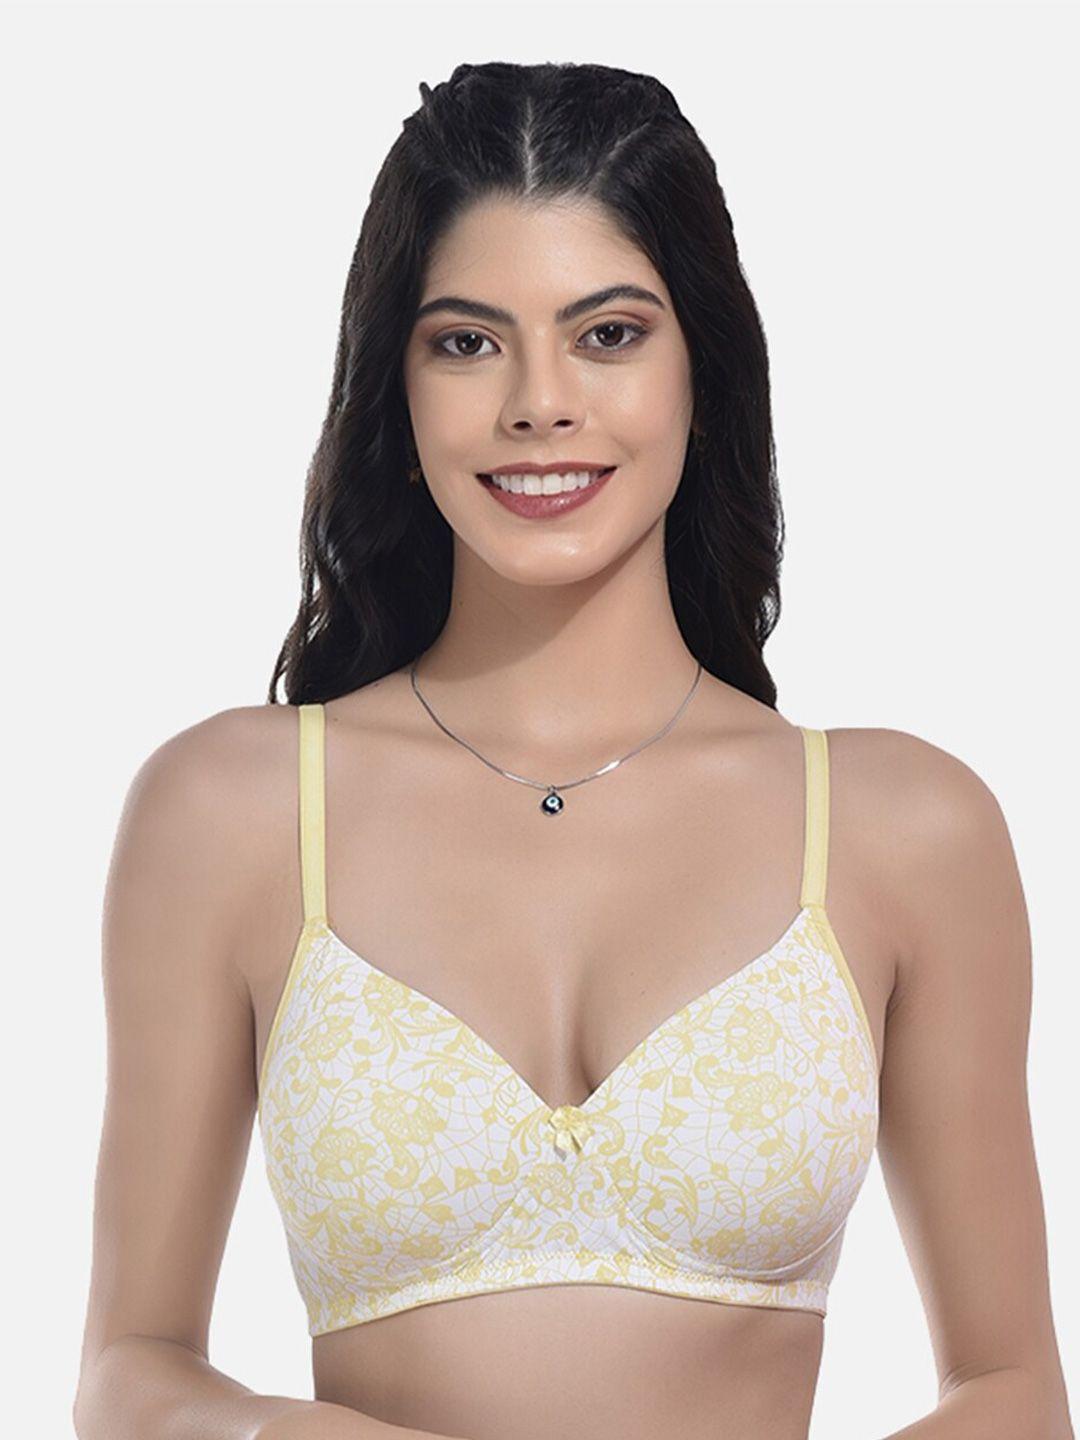 styfun floral printed full coverage all day comfort super support cotton t-shirt bra